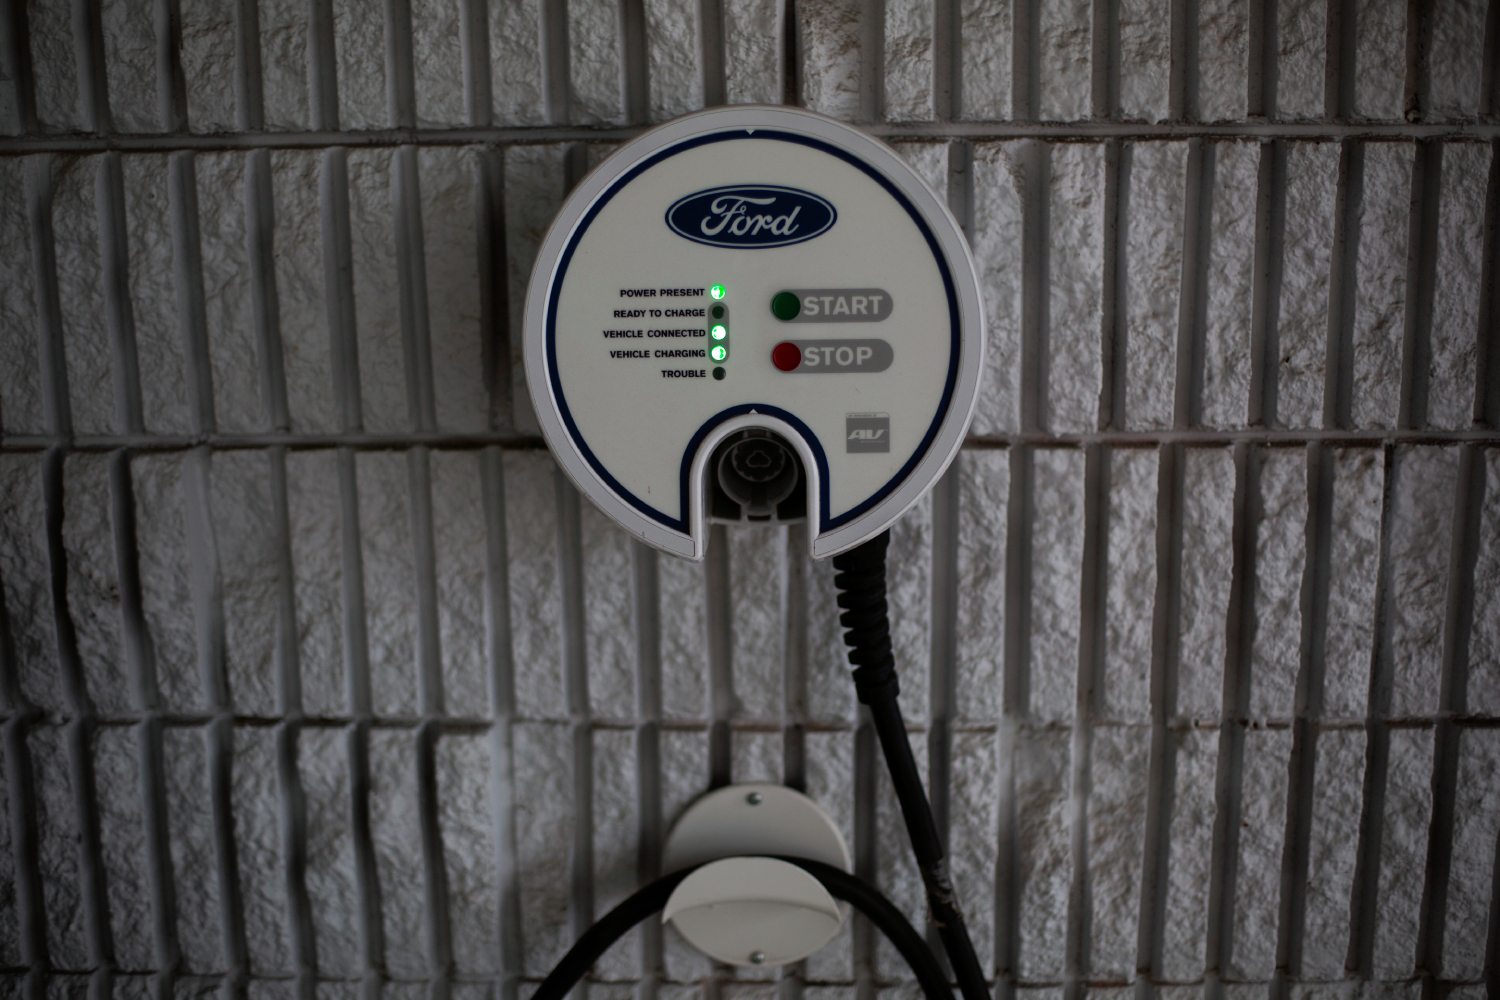 Ford and Purdue are working on electric vehicle charging